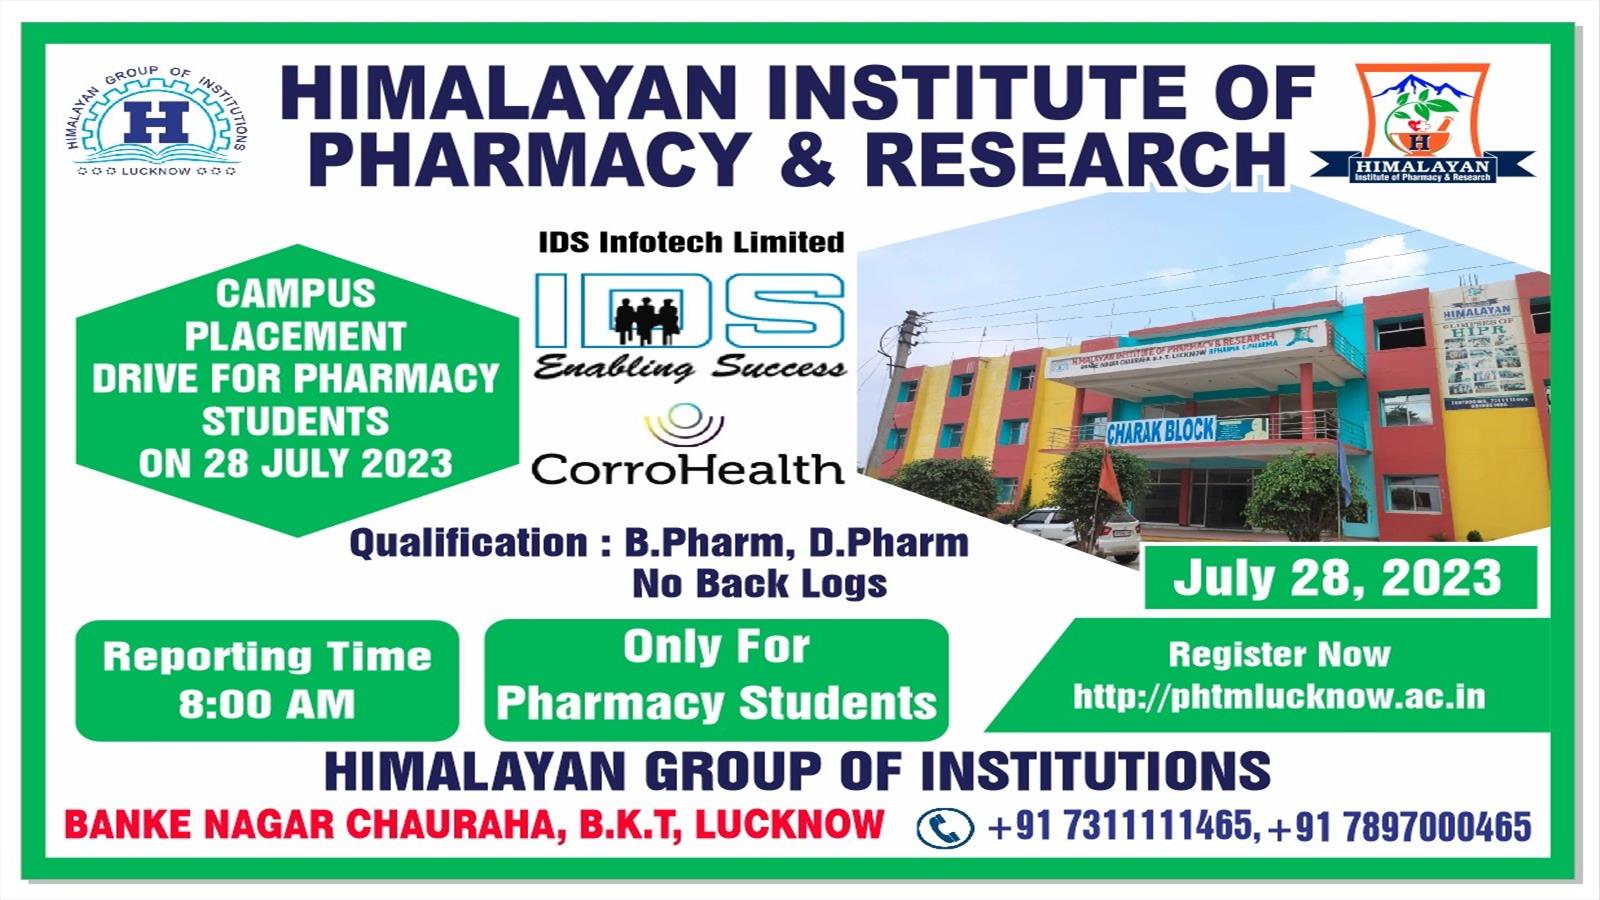 CAMPUS PLACEMENT DRIVE FOR PHARMACY STUDENTS